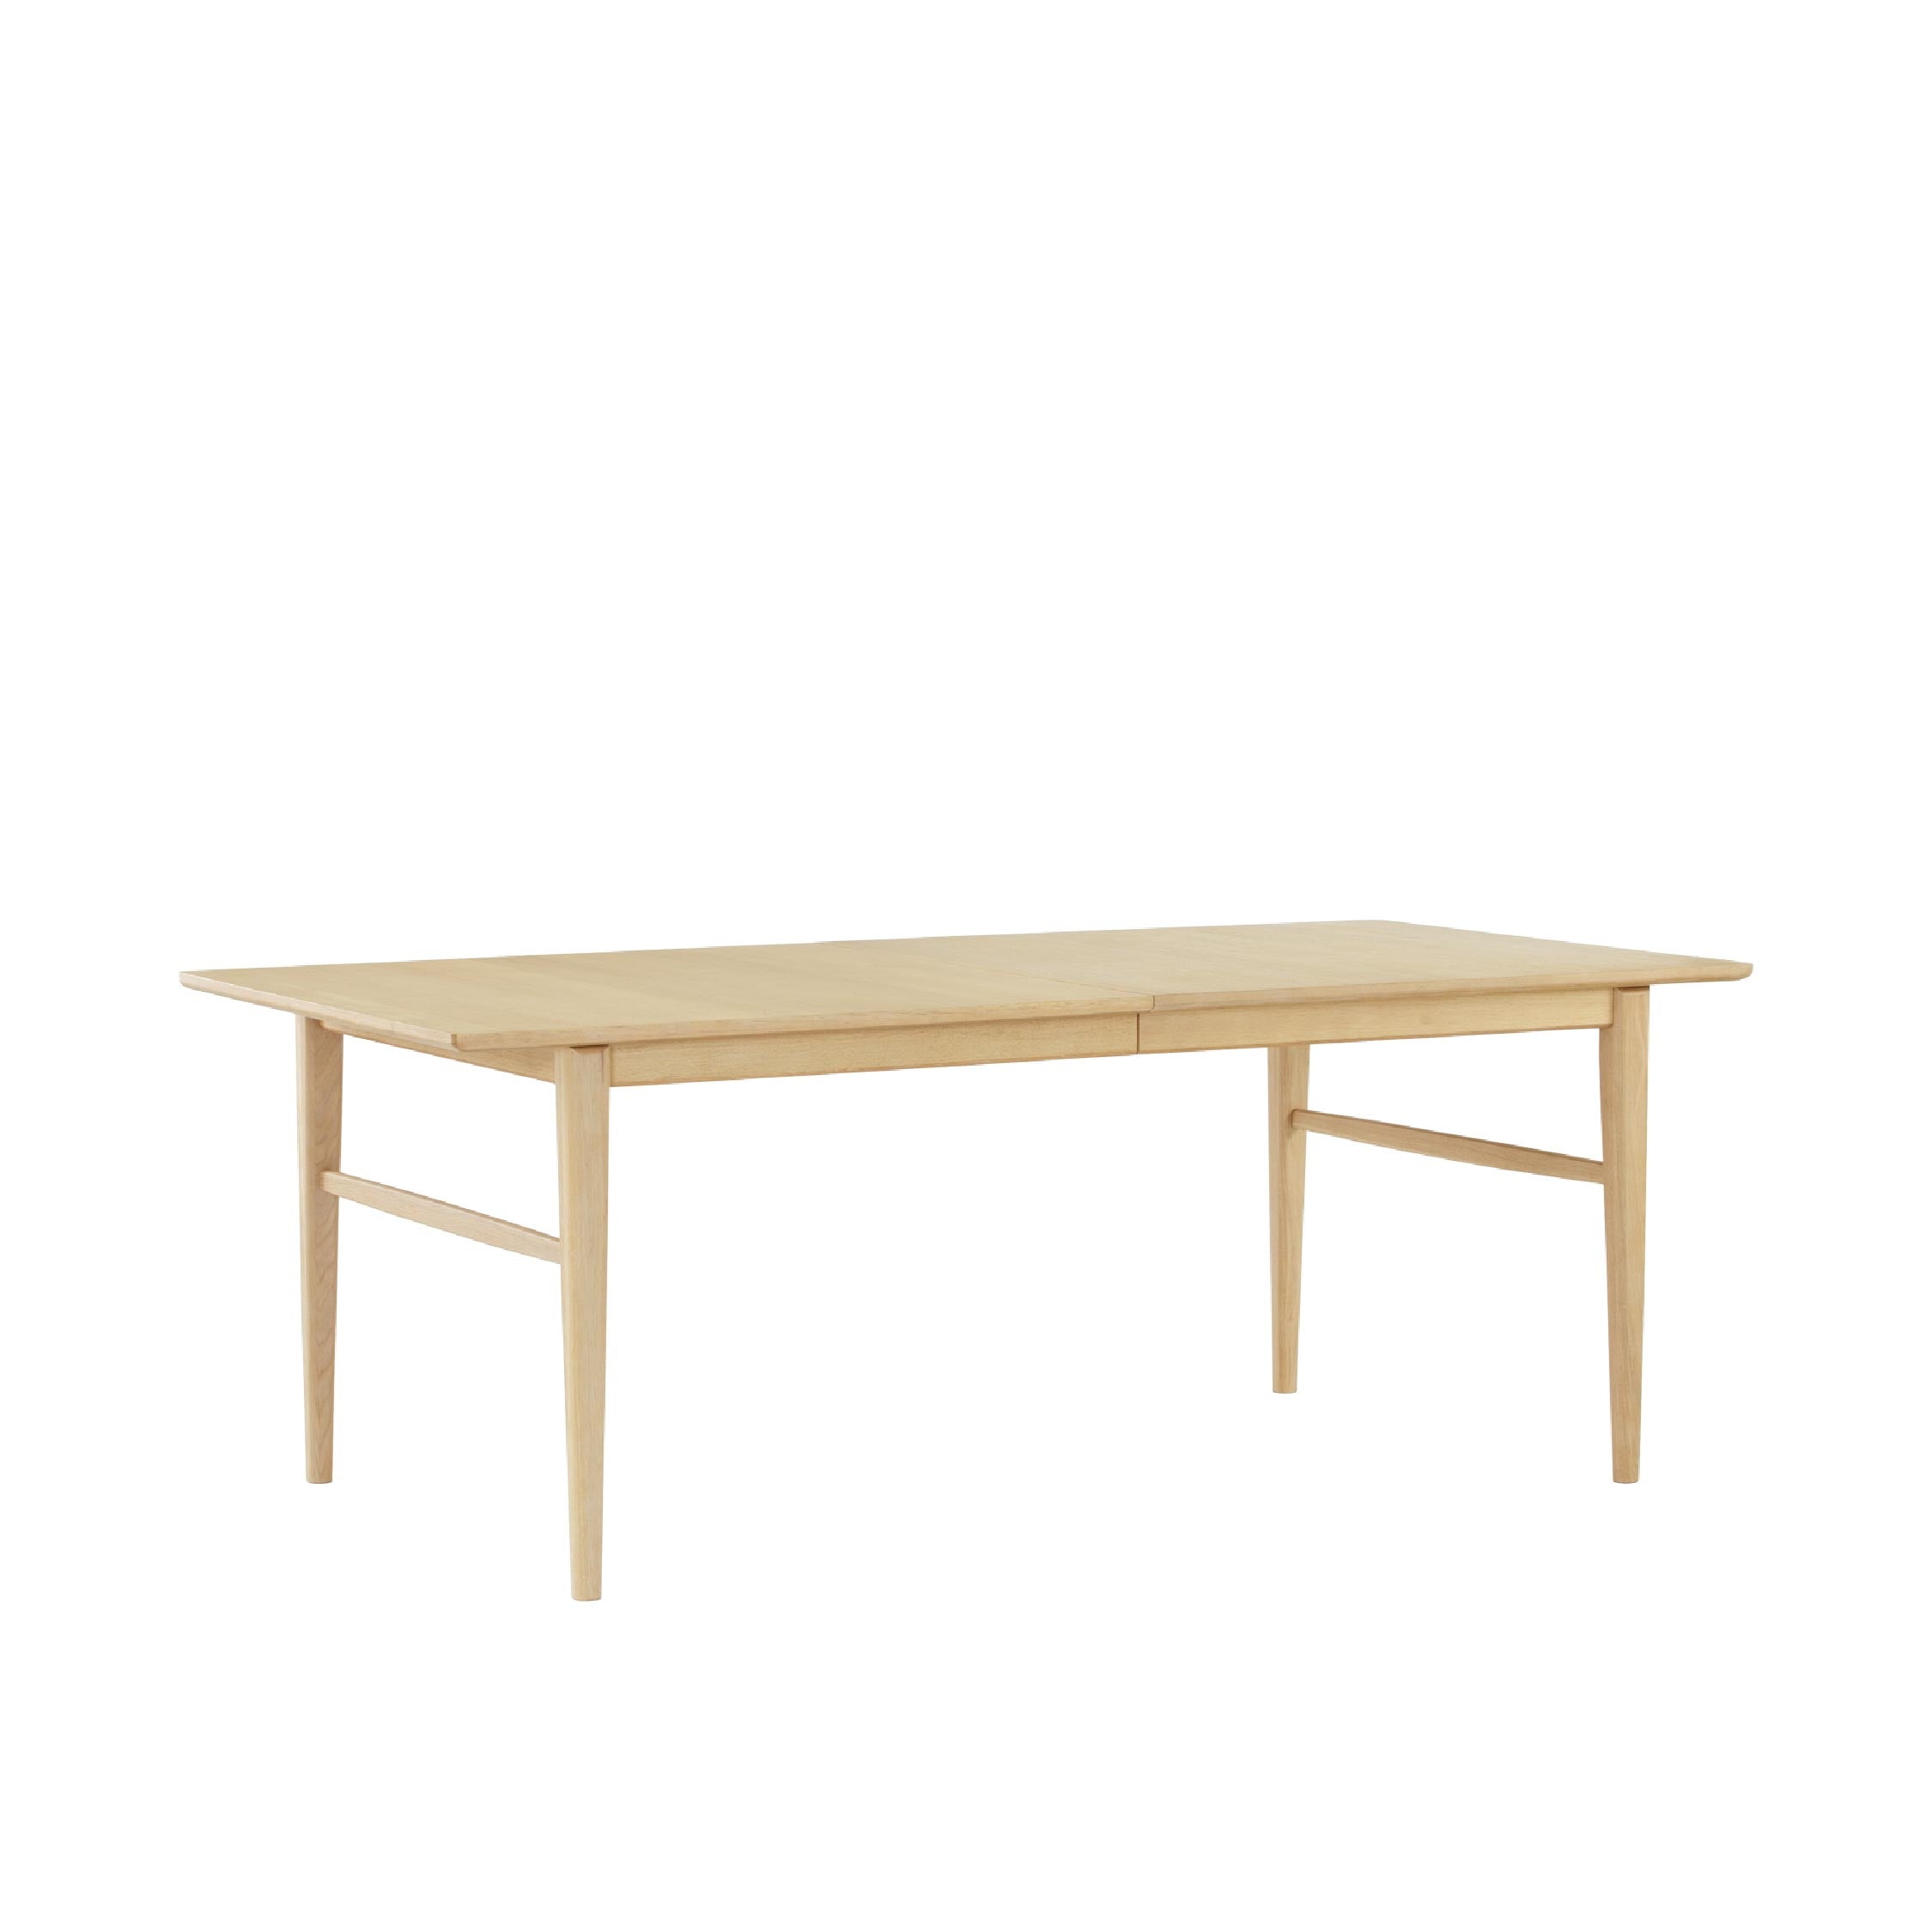 SOLID Extendable Dining Table 2.95m